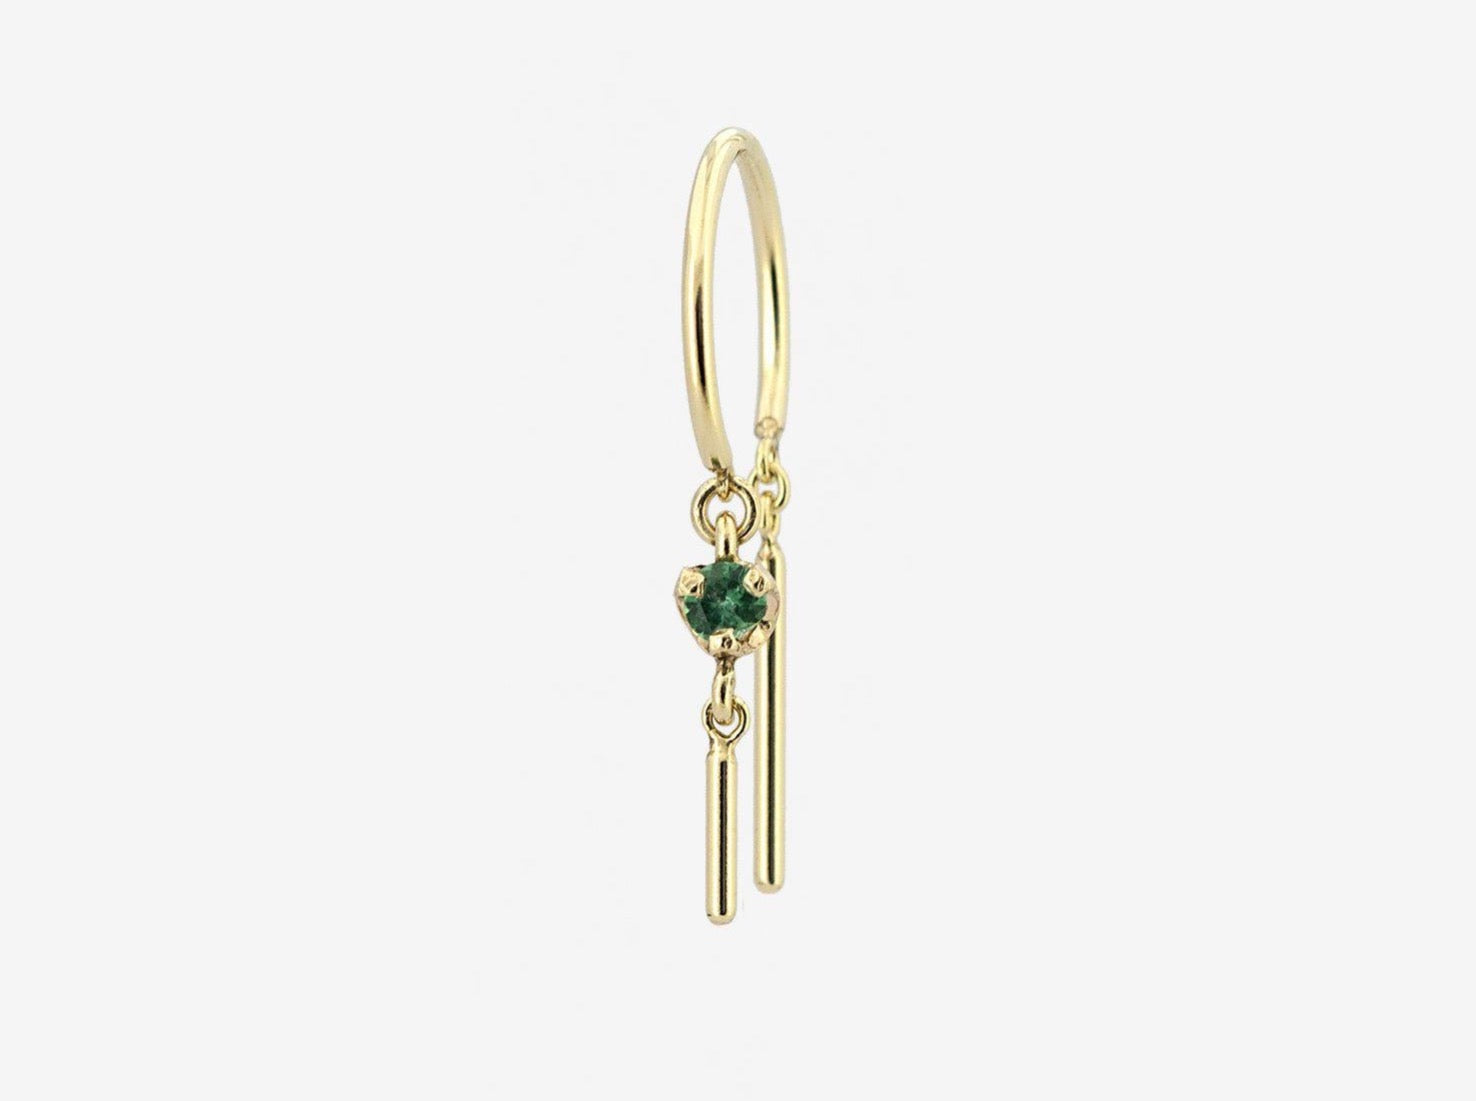 Diamond Baby Chime Earring in 14k Yellow Gold with Emerald by jack&g